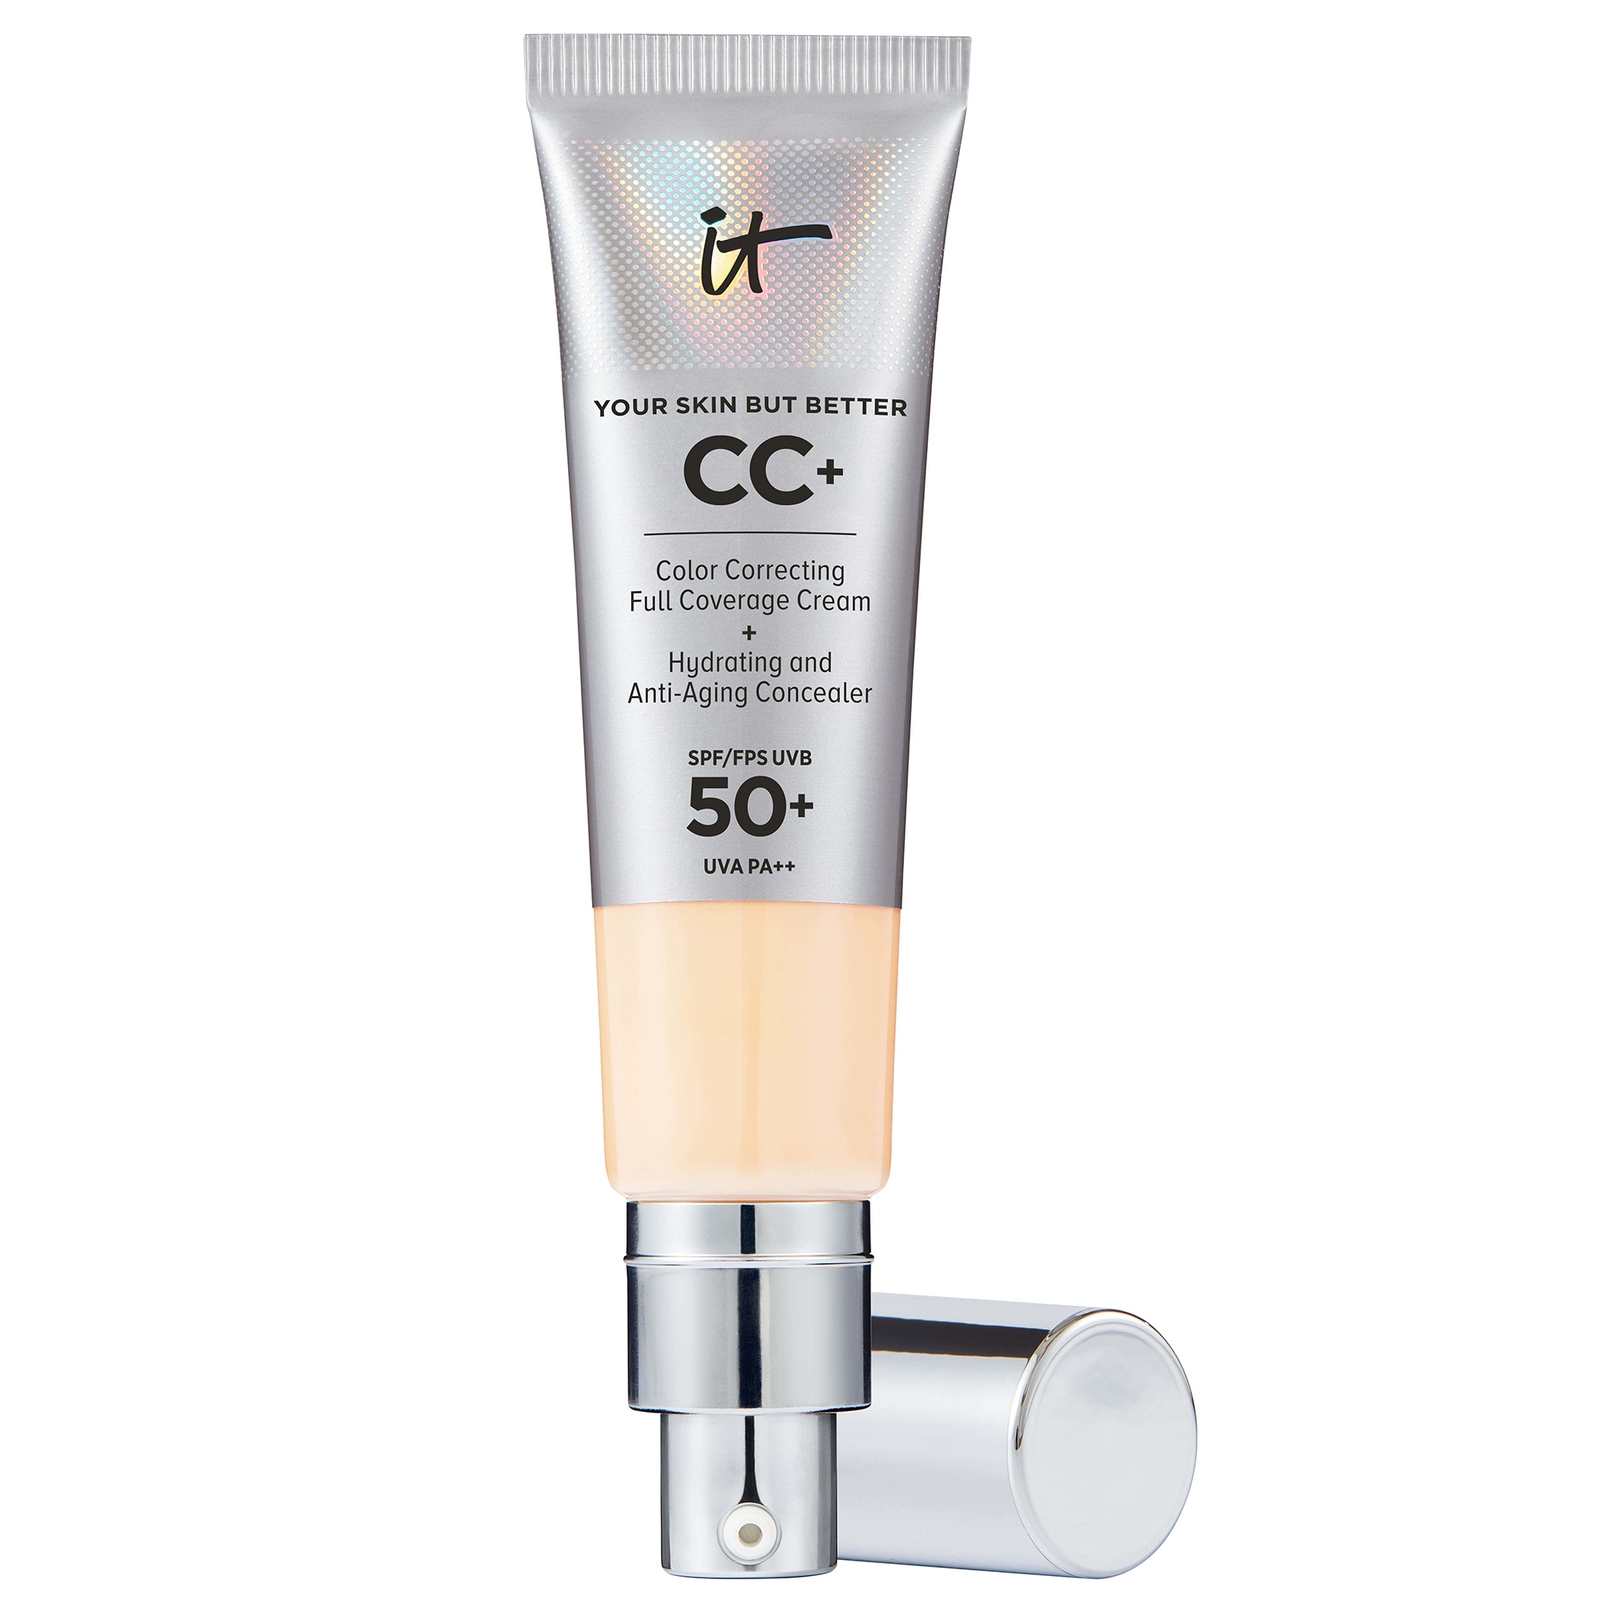 IT Cosmetics Your Skin But Better CC+ Cream with SPF50 32ml (Various Shades) - Fair Warm von IT Cosmetics